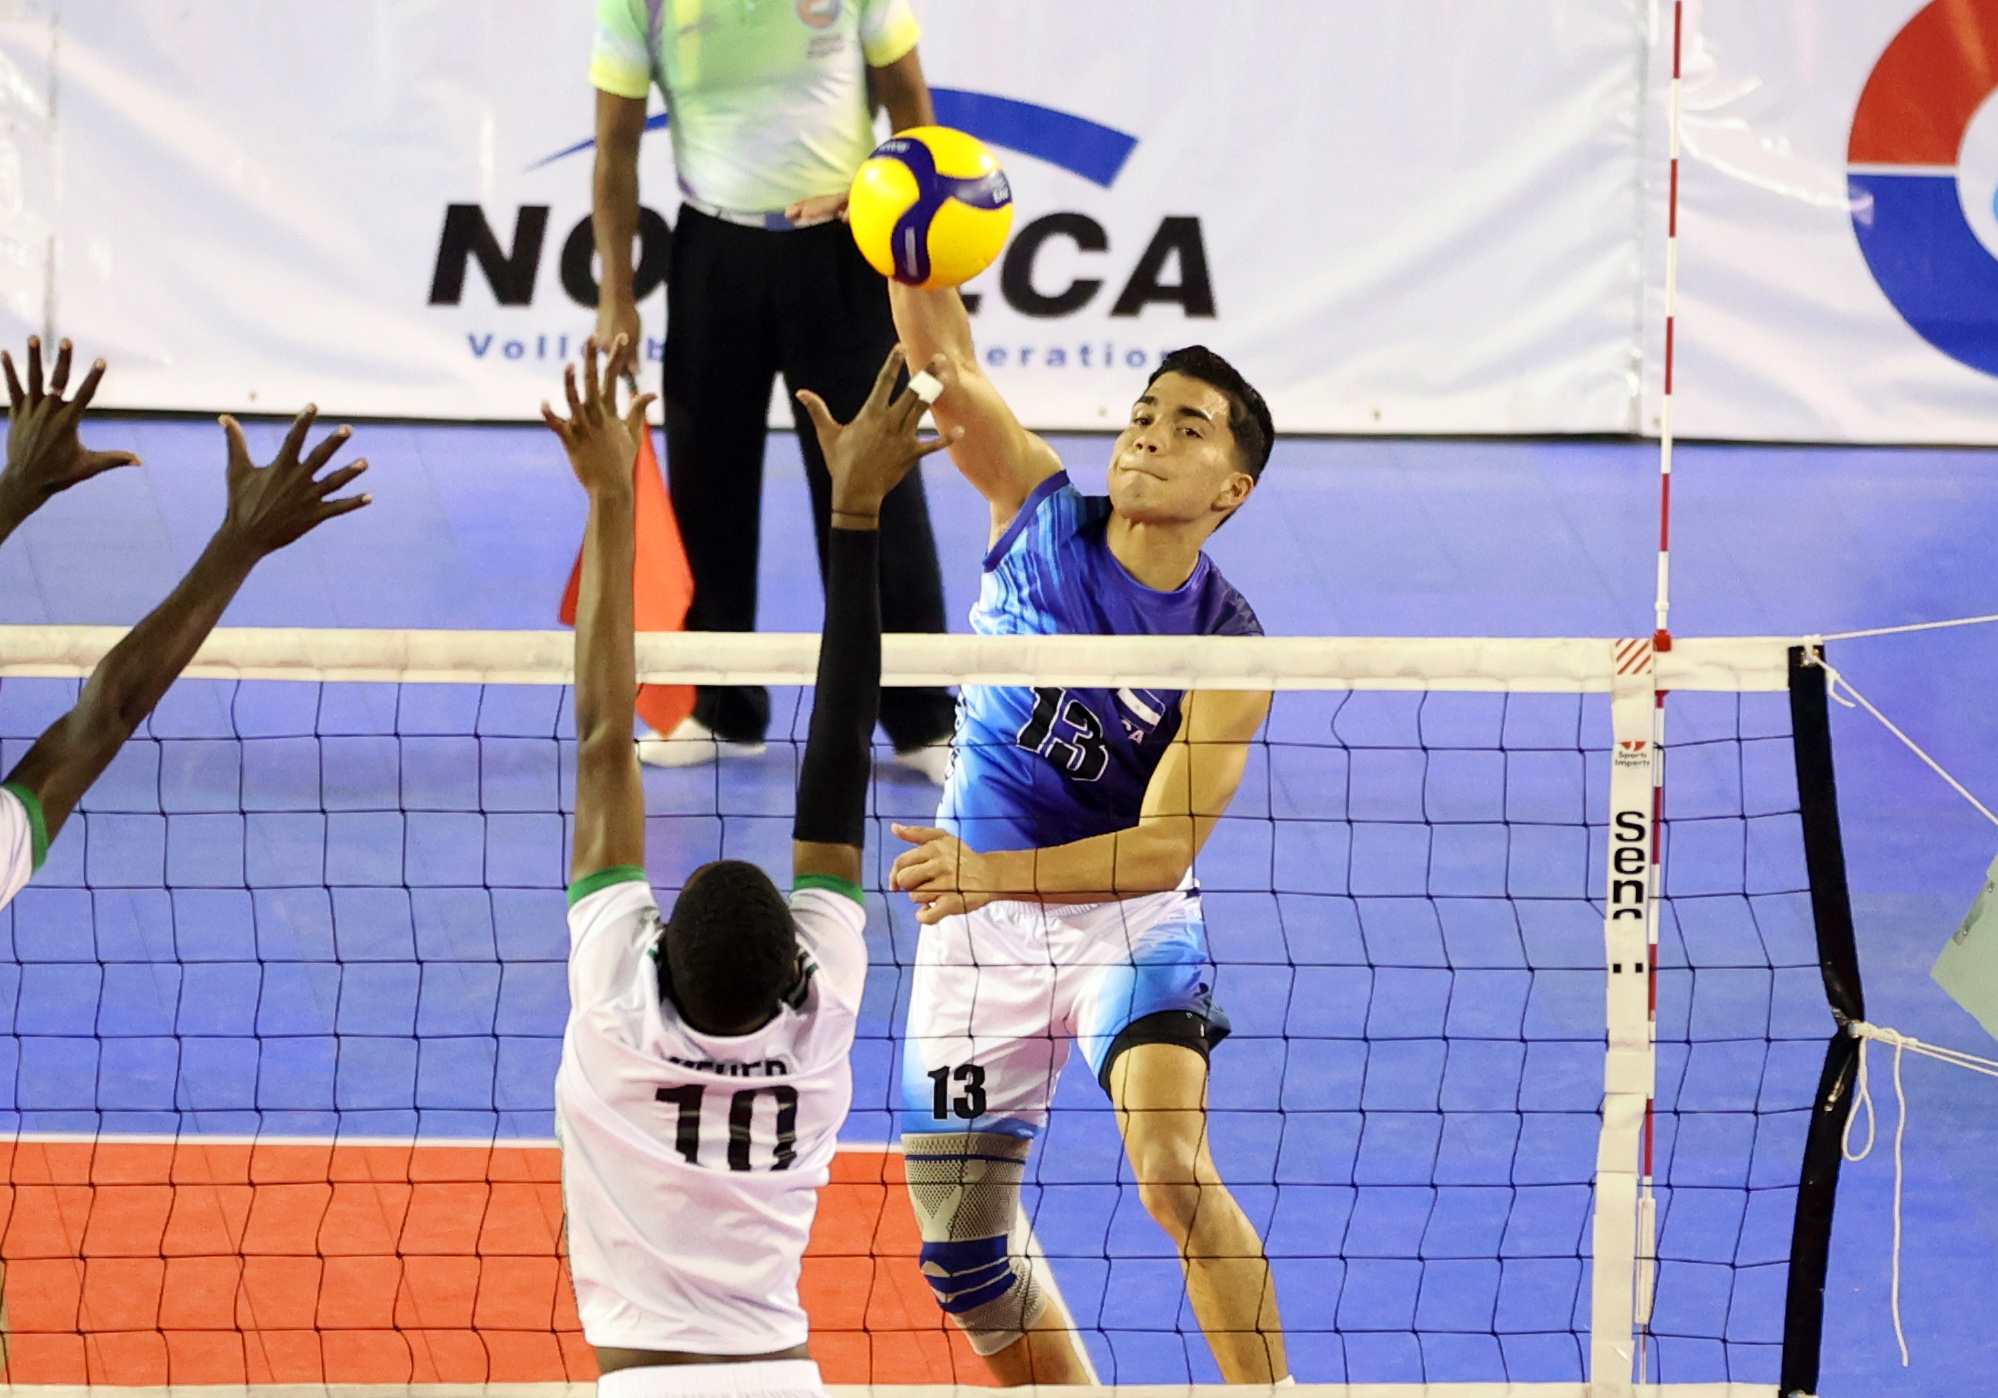 Nicaragua third in pool B will face Mexico in quarterfinals 